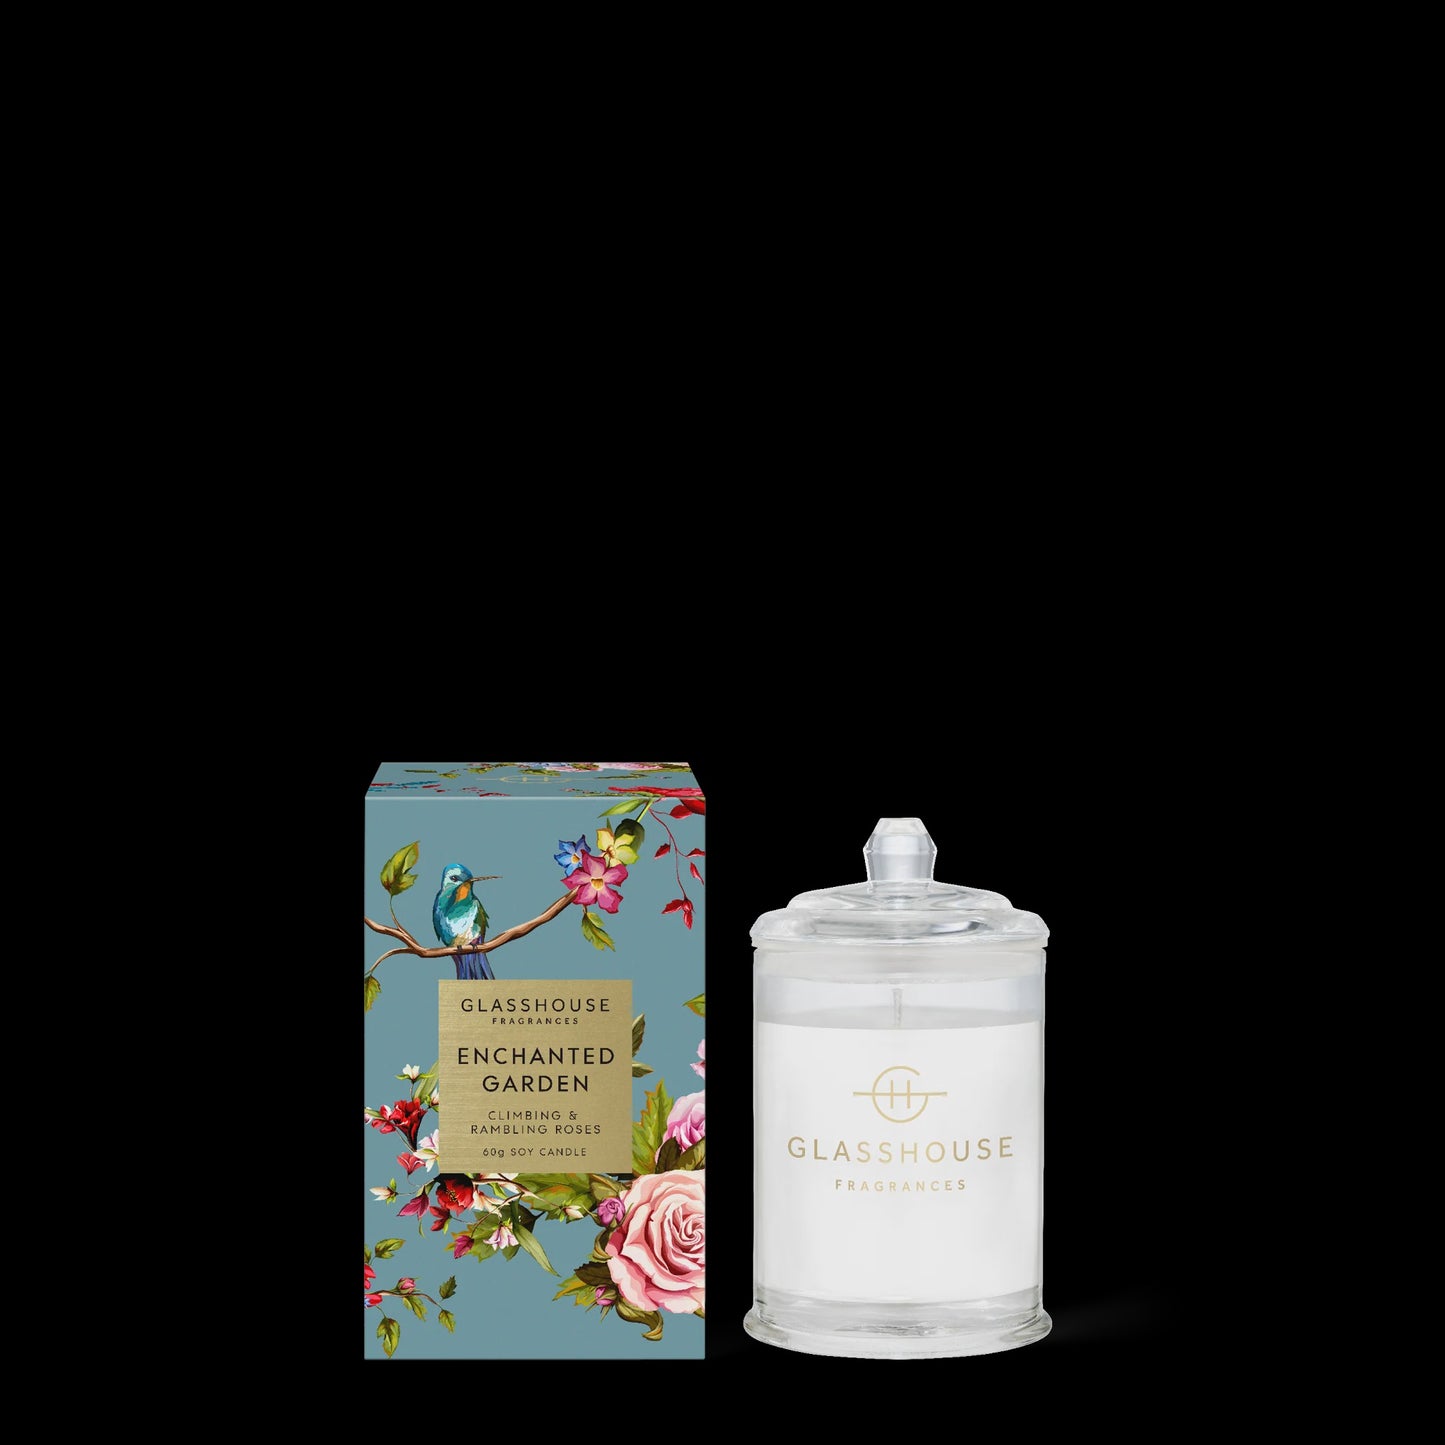 ENCHANTED GARDEN CANDLE 60G - GLASSHOUSE - candles - Stomp Shoes Darwin